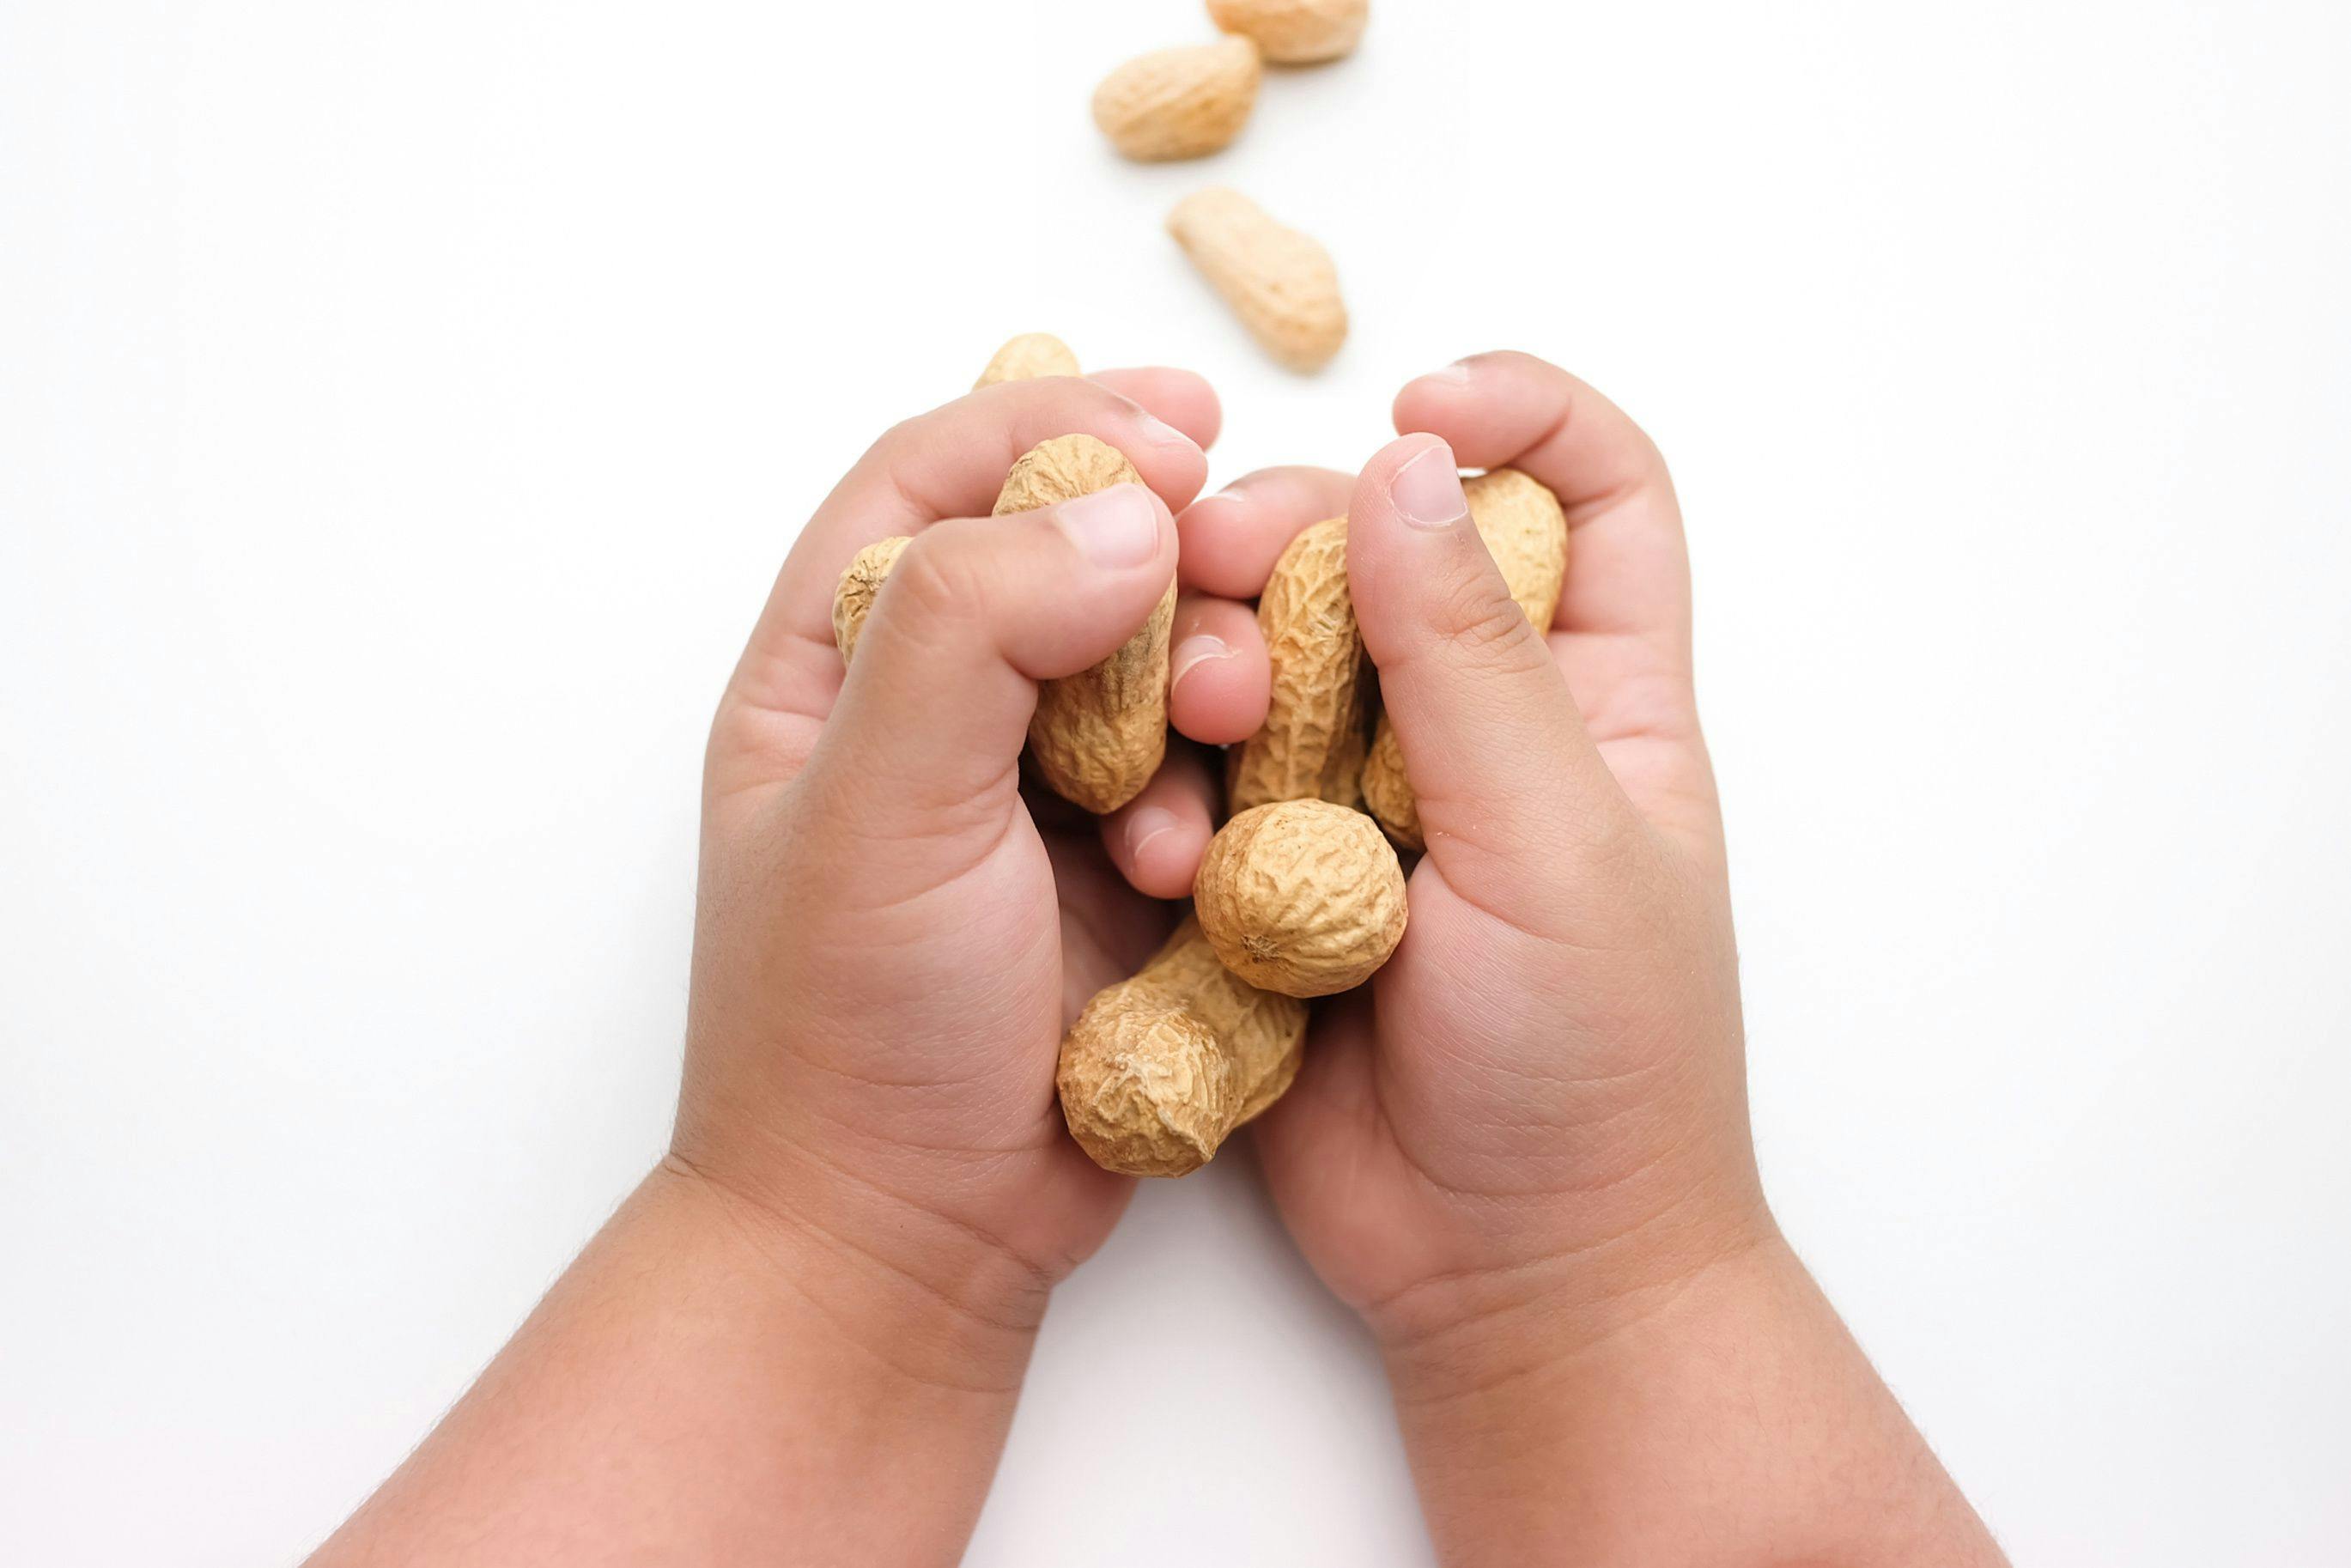 New skin patch tested for peanut immunotherapy in toddlers | Image Credit: © Tanawut - © Tanawut - stock.adobe.com.